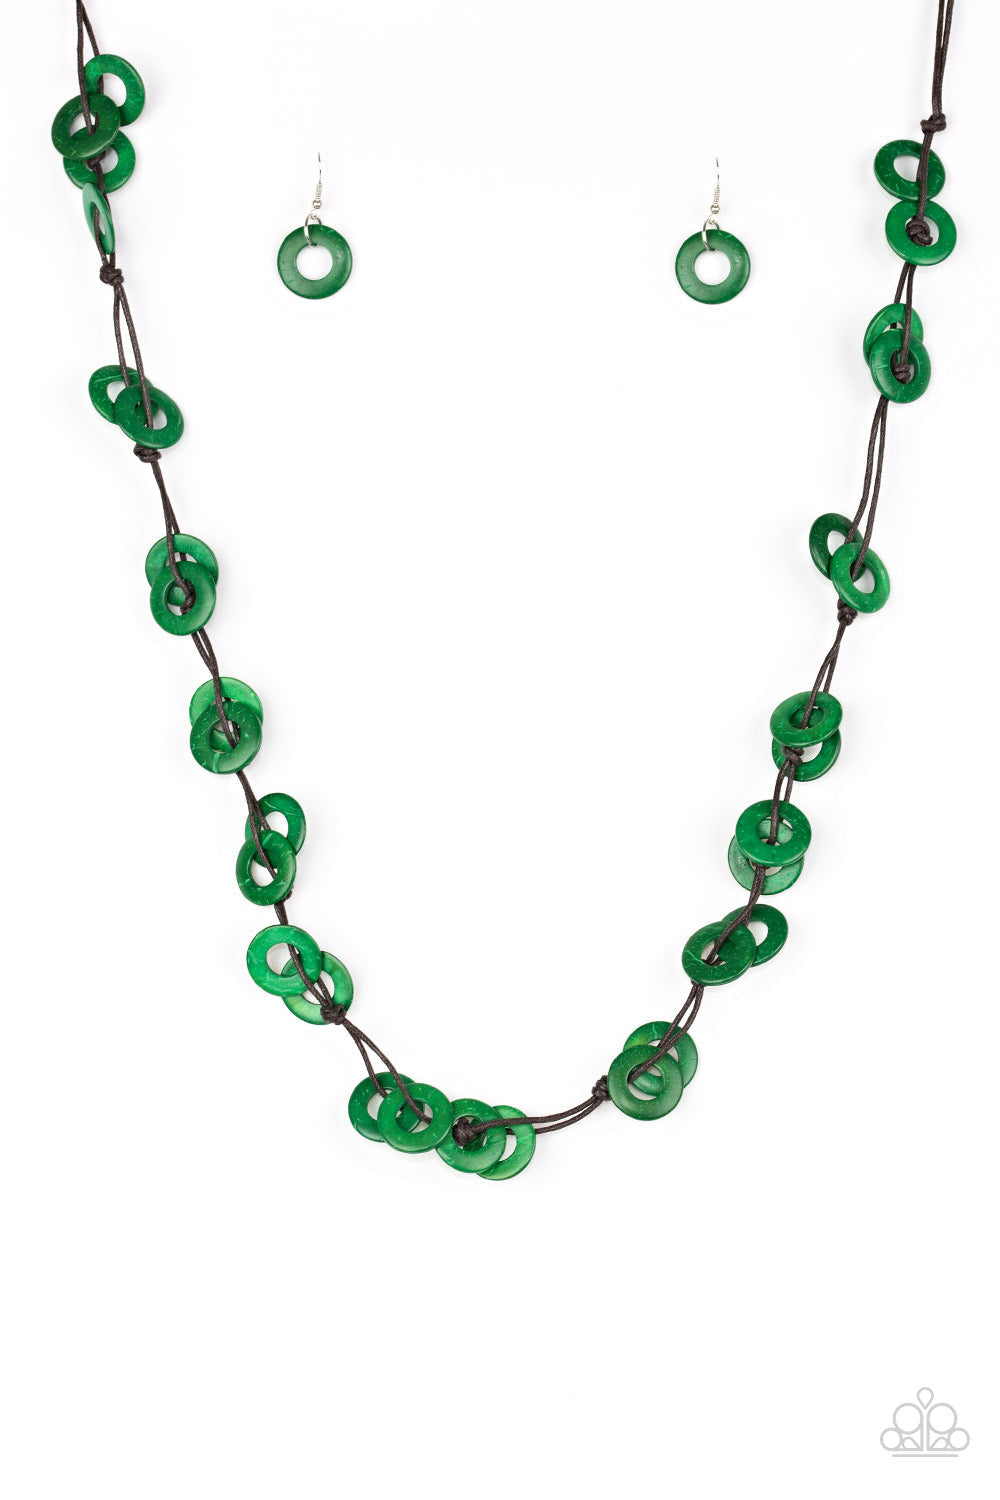 Waikiki Winds - Green Wood Fashion Necklace - Paparazzi Accessories - Shiny brown cording knots around refreshing green wooden discs, creating a colorful display across the chest. Features a button loop closure. Sold as one individual necklace.